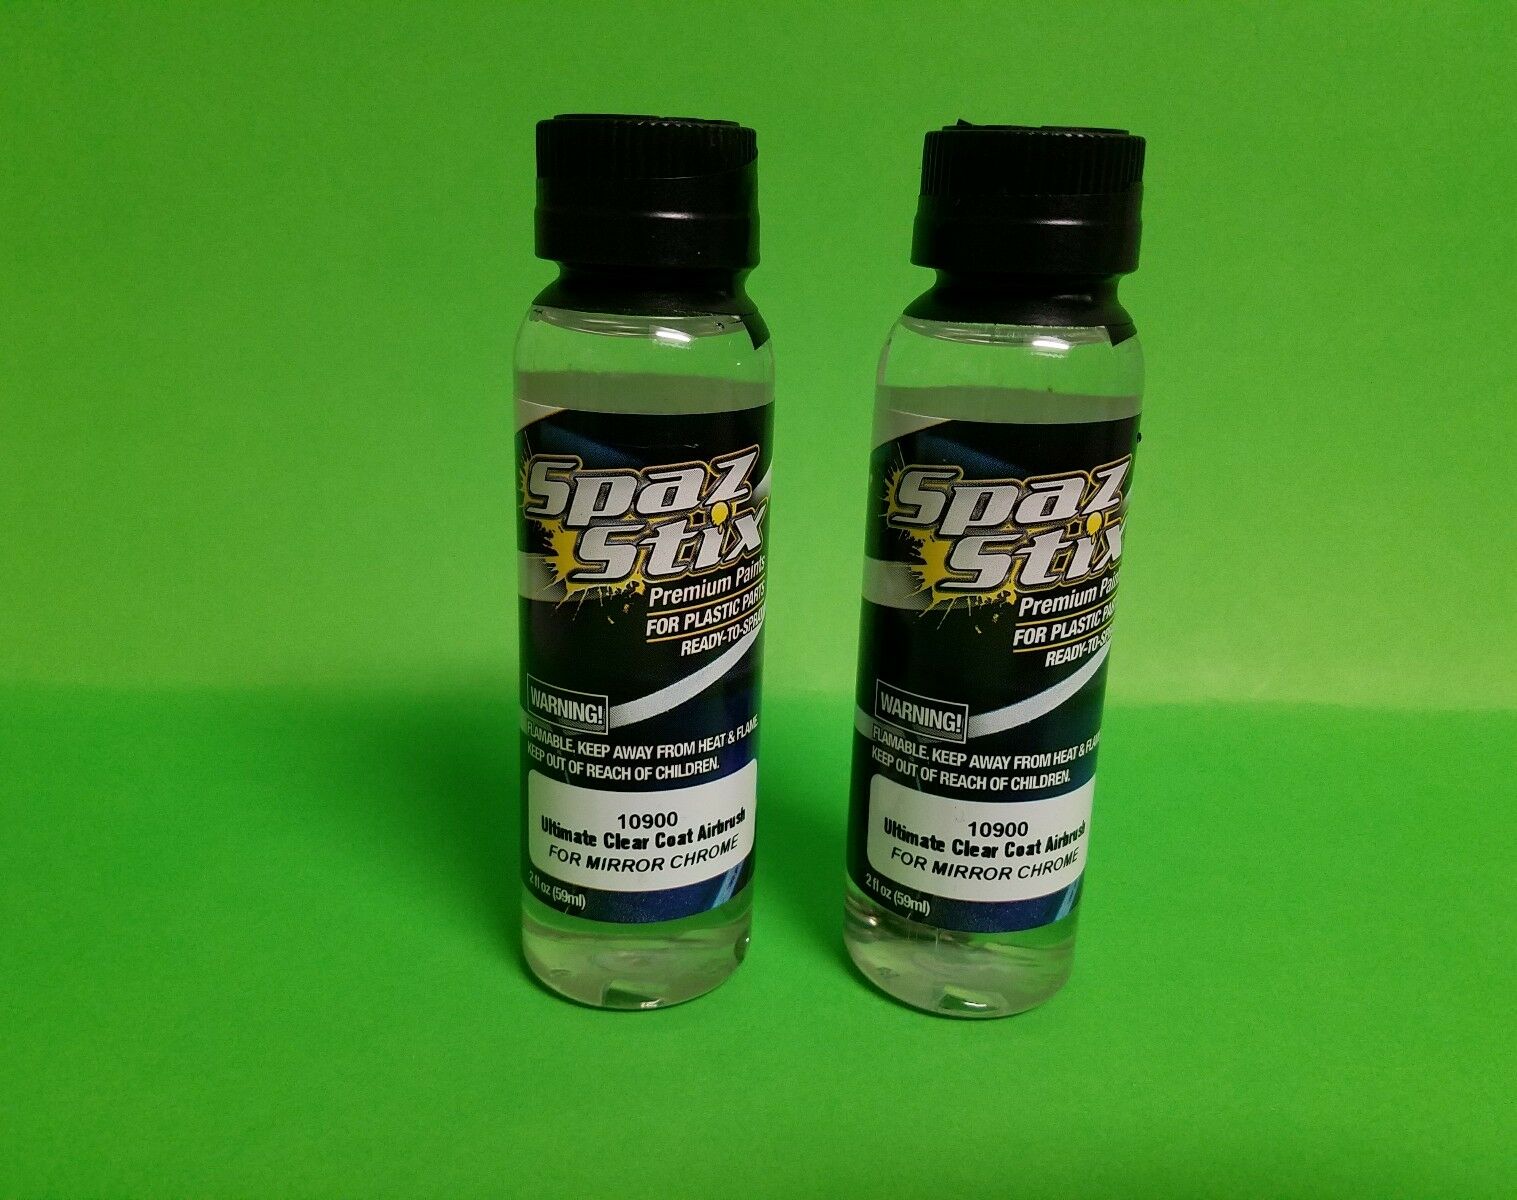 2 PACK Spaz Stix 10900  Ultimate Clear Coat Airbrush Paint 2oz